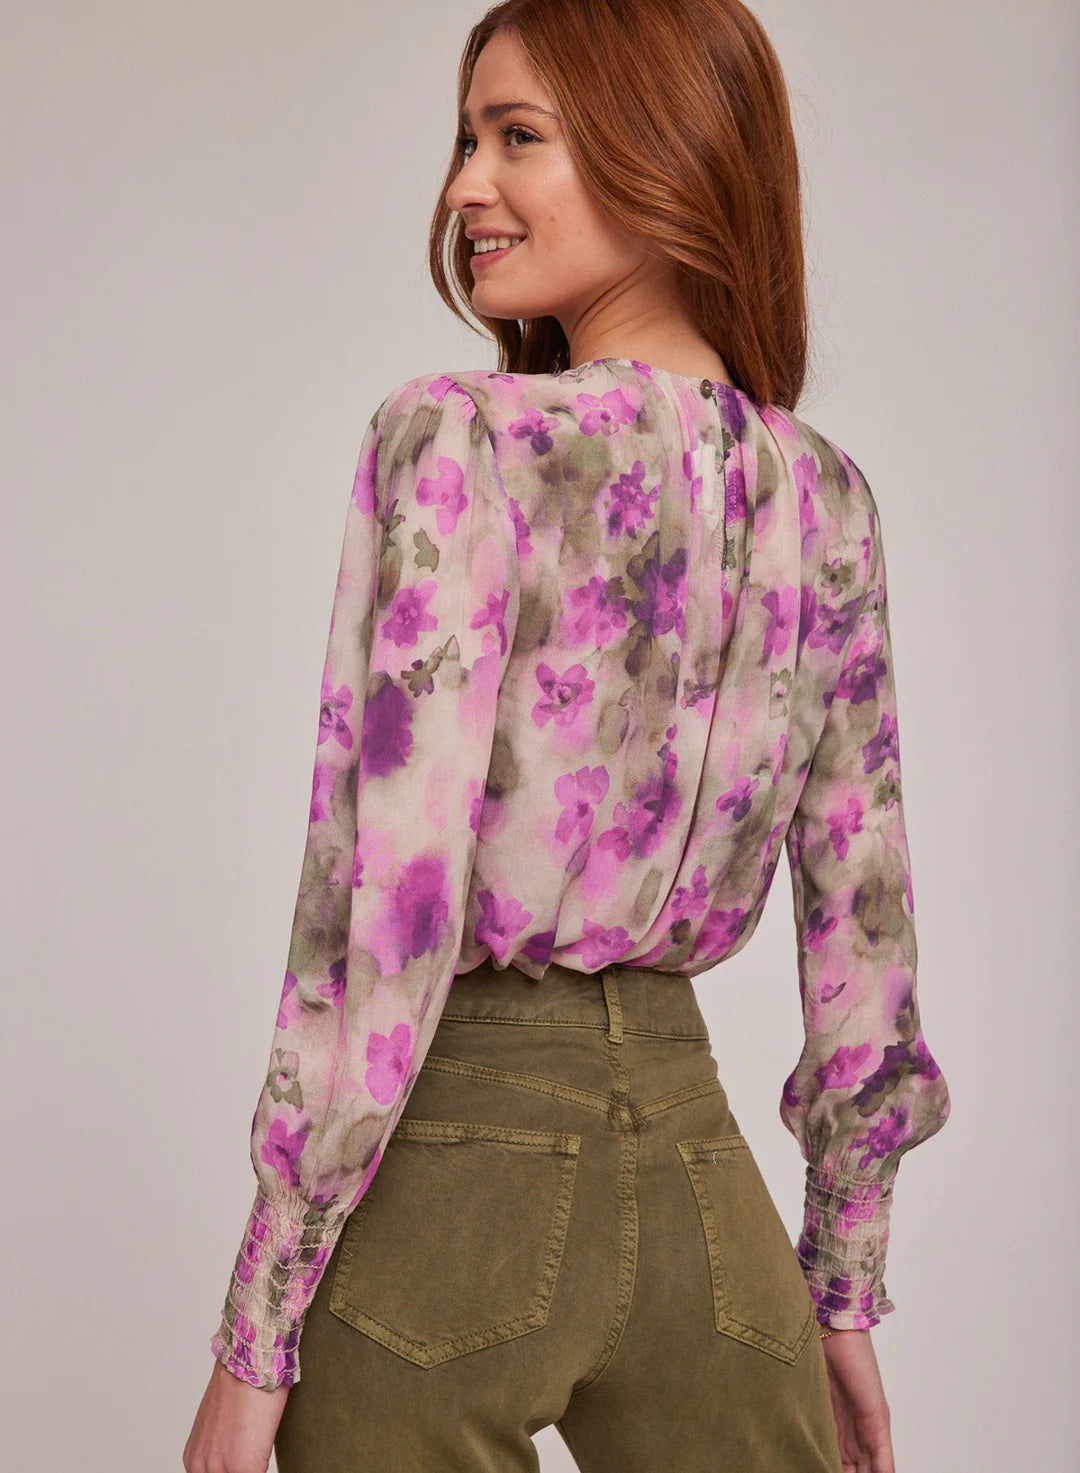 Smocked sleeve blouse - floral camo print